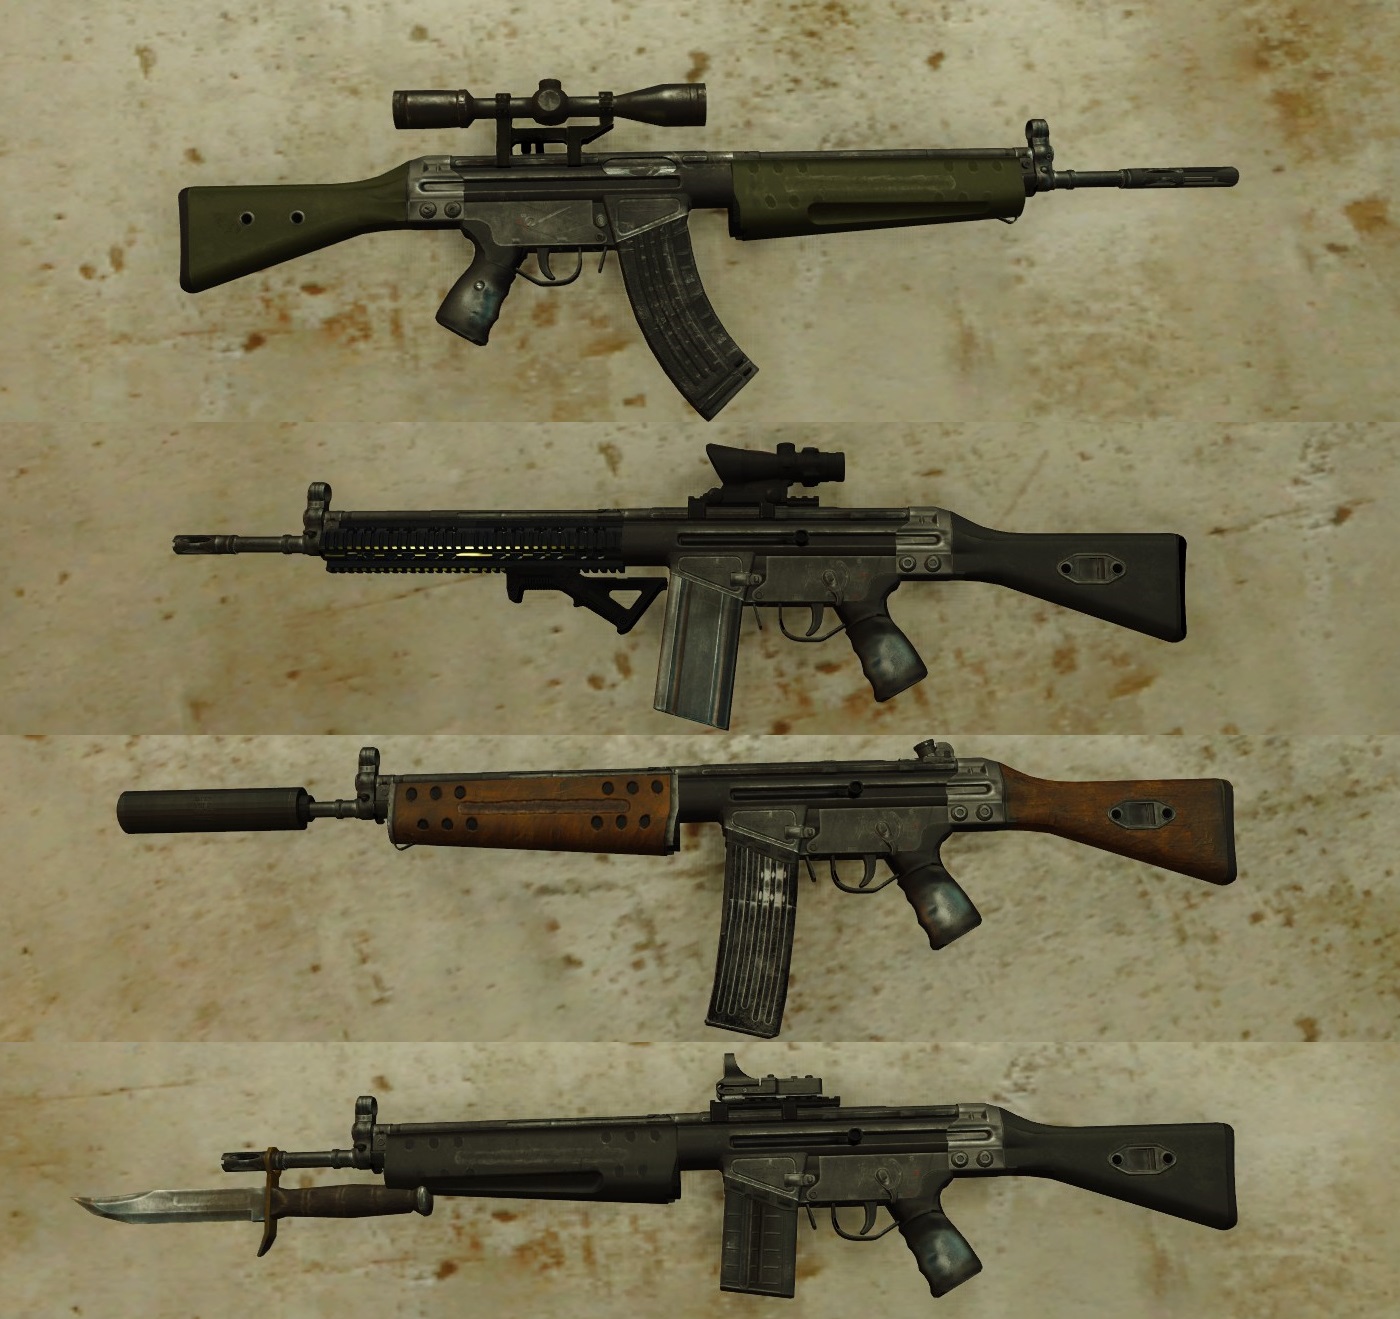 Assault rifles in fallout 4 фото 80